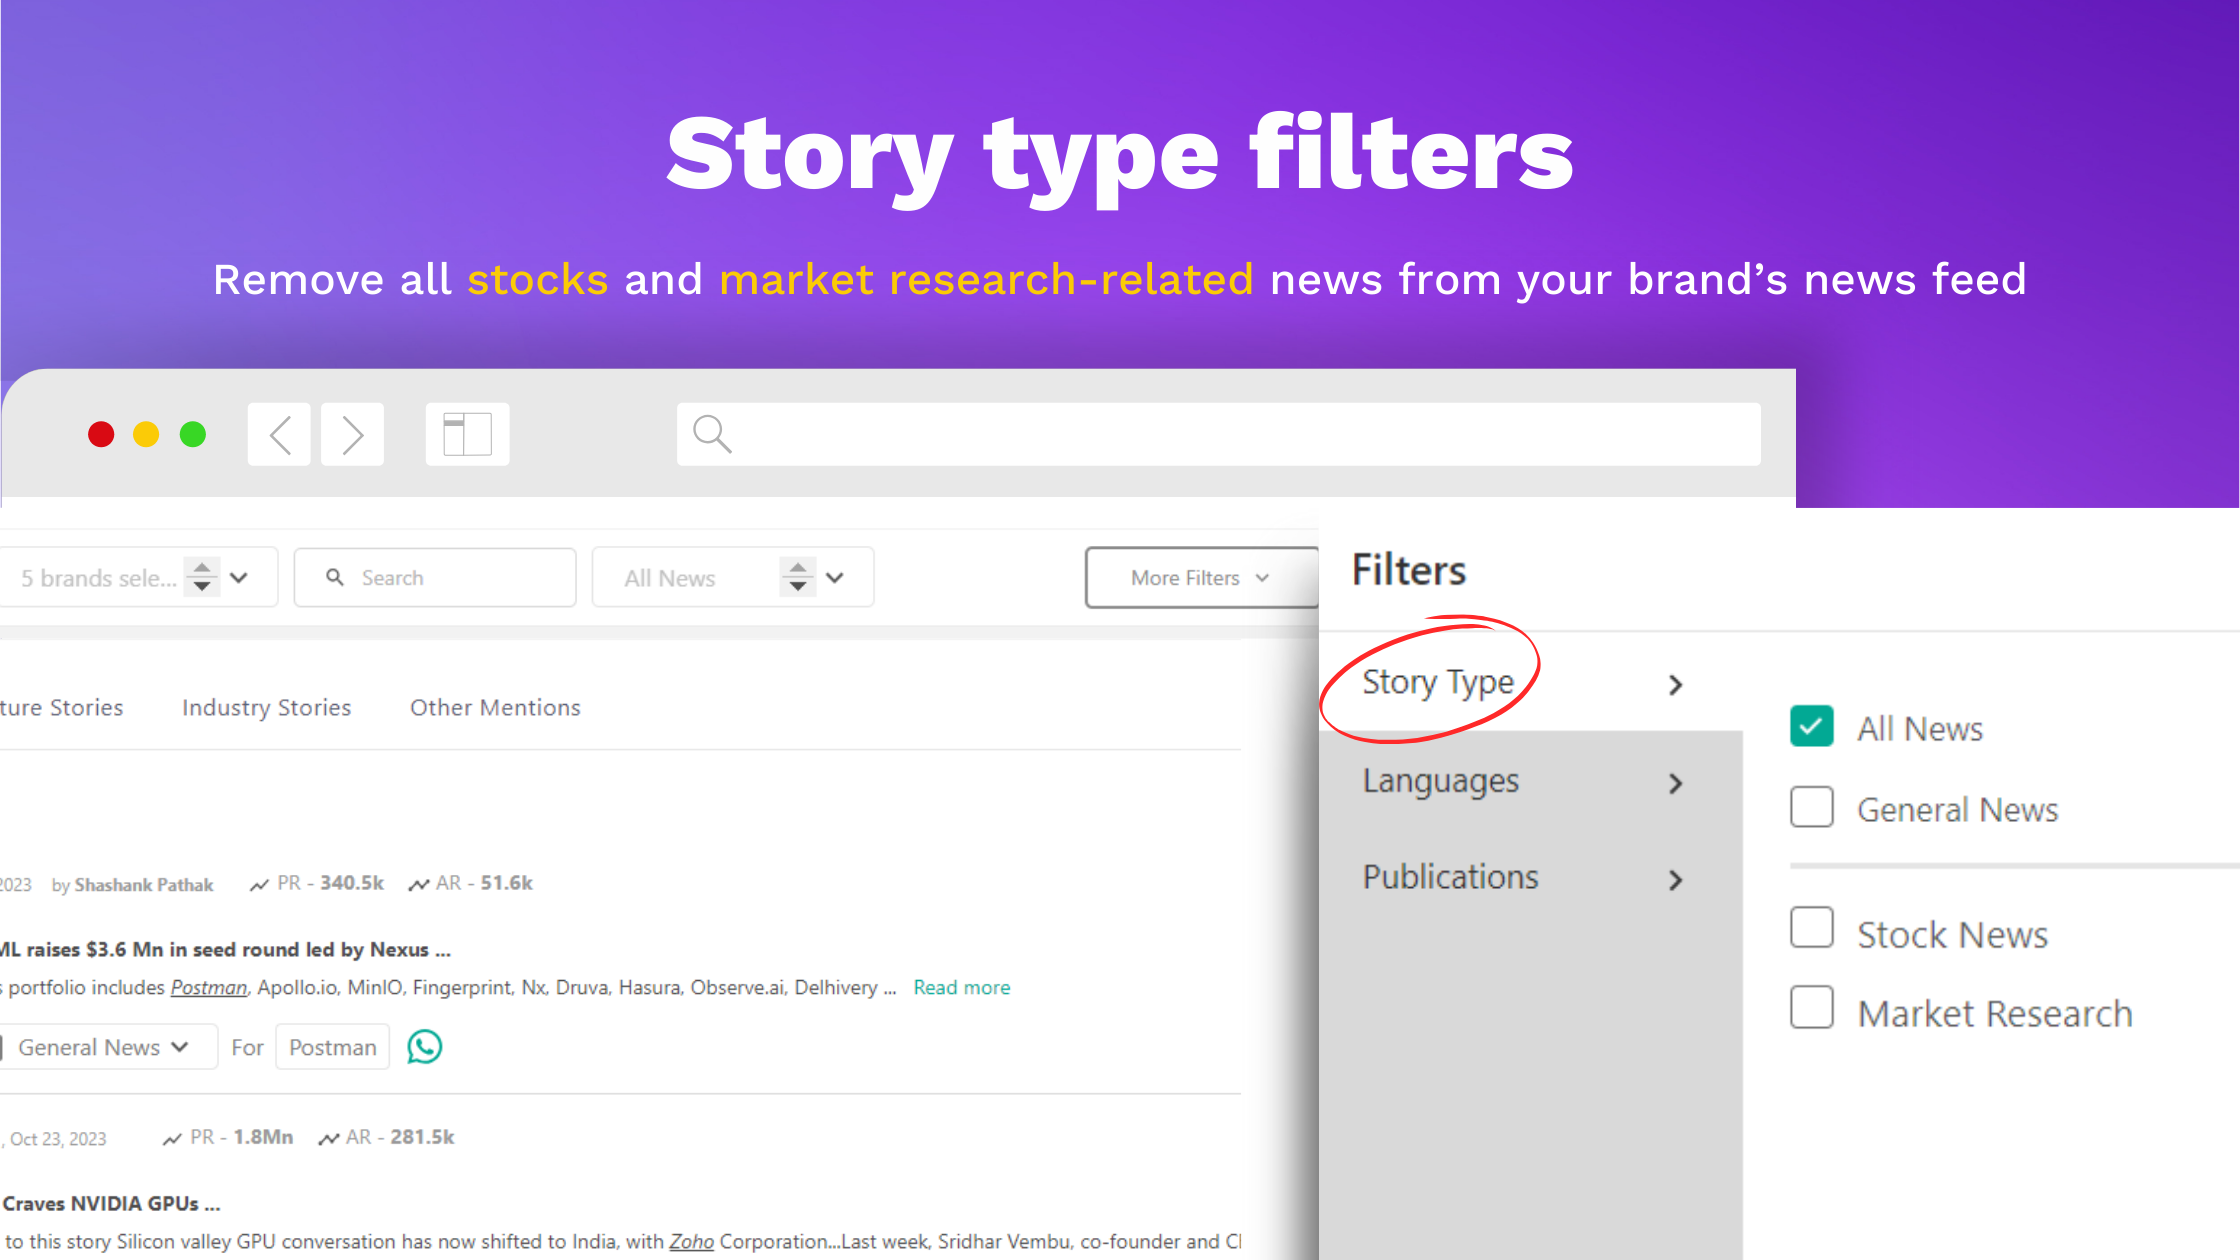 Story type filters